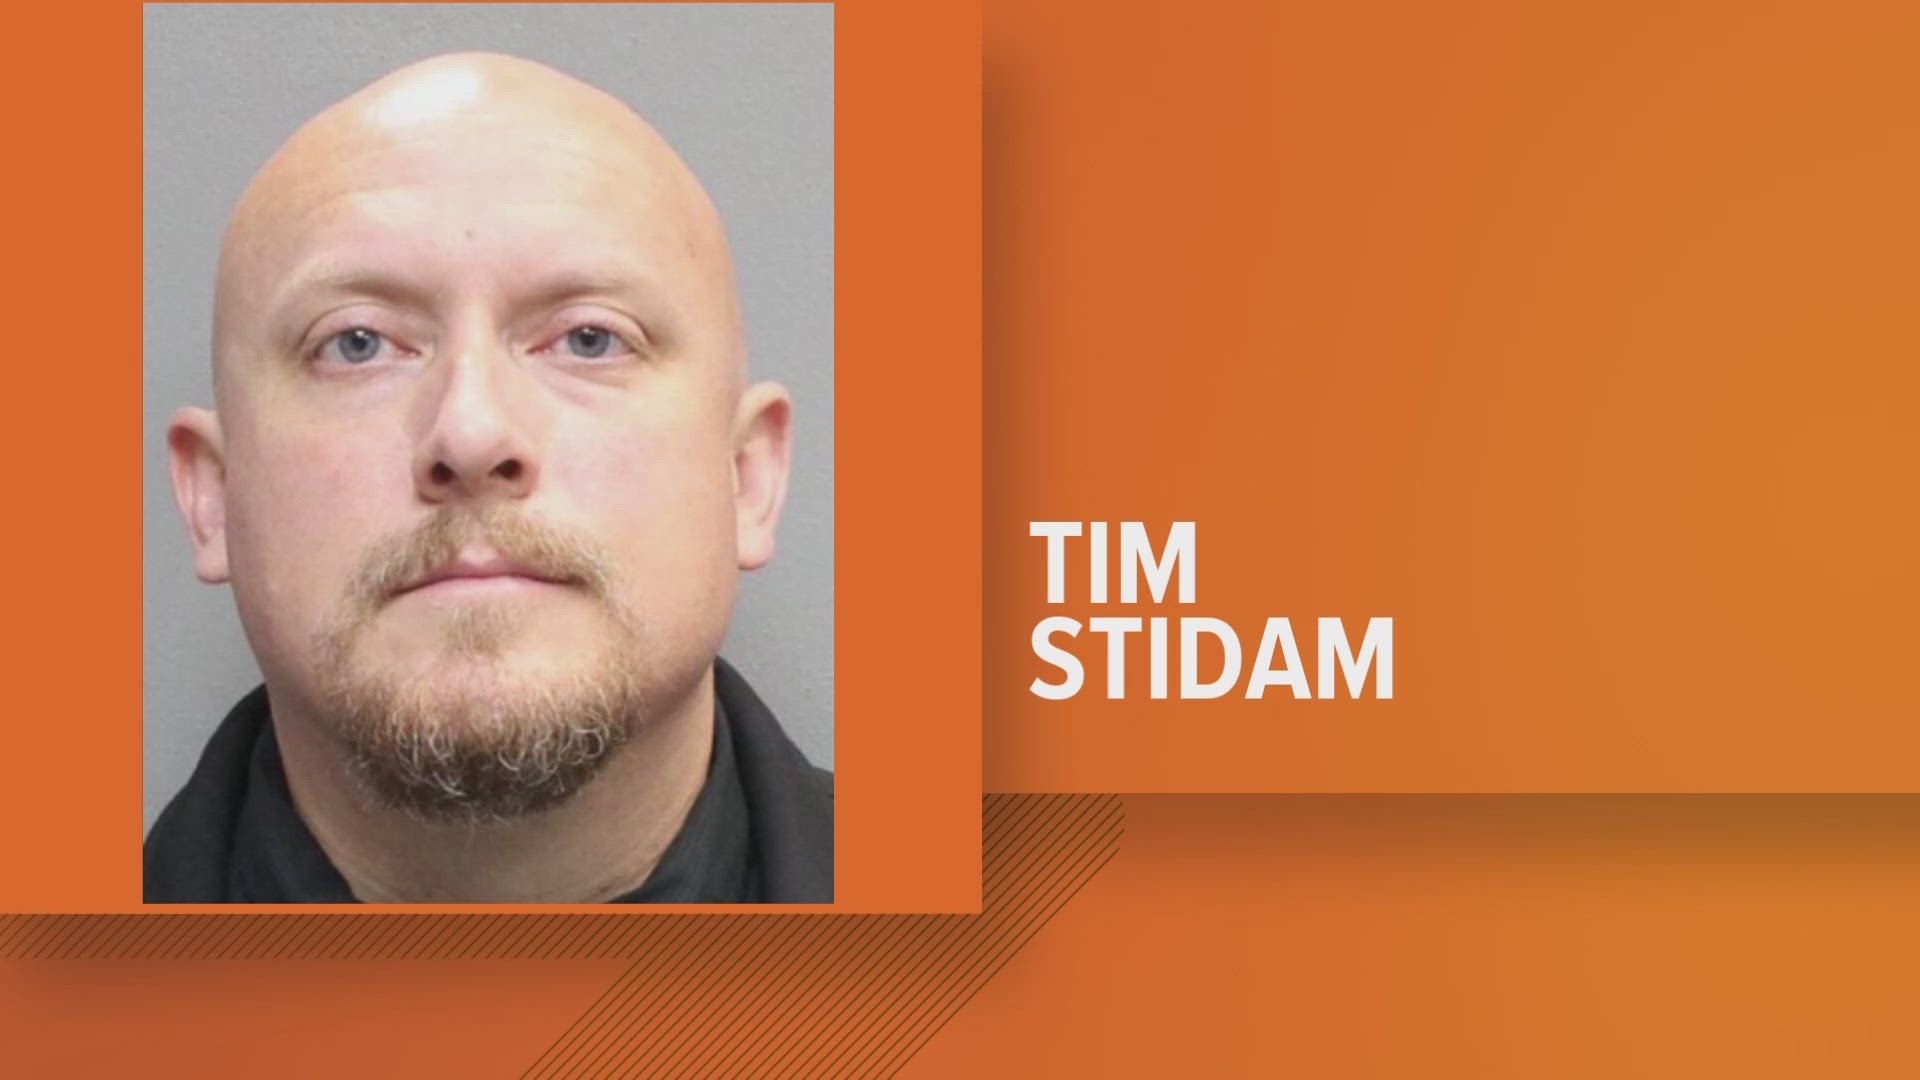 Tim Stidam was set to stand trial Monday. He pleaded guilty instead.